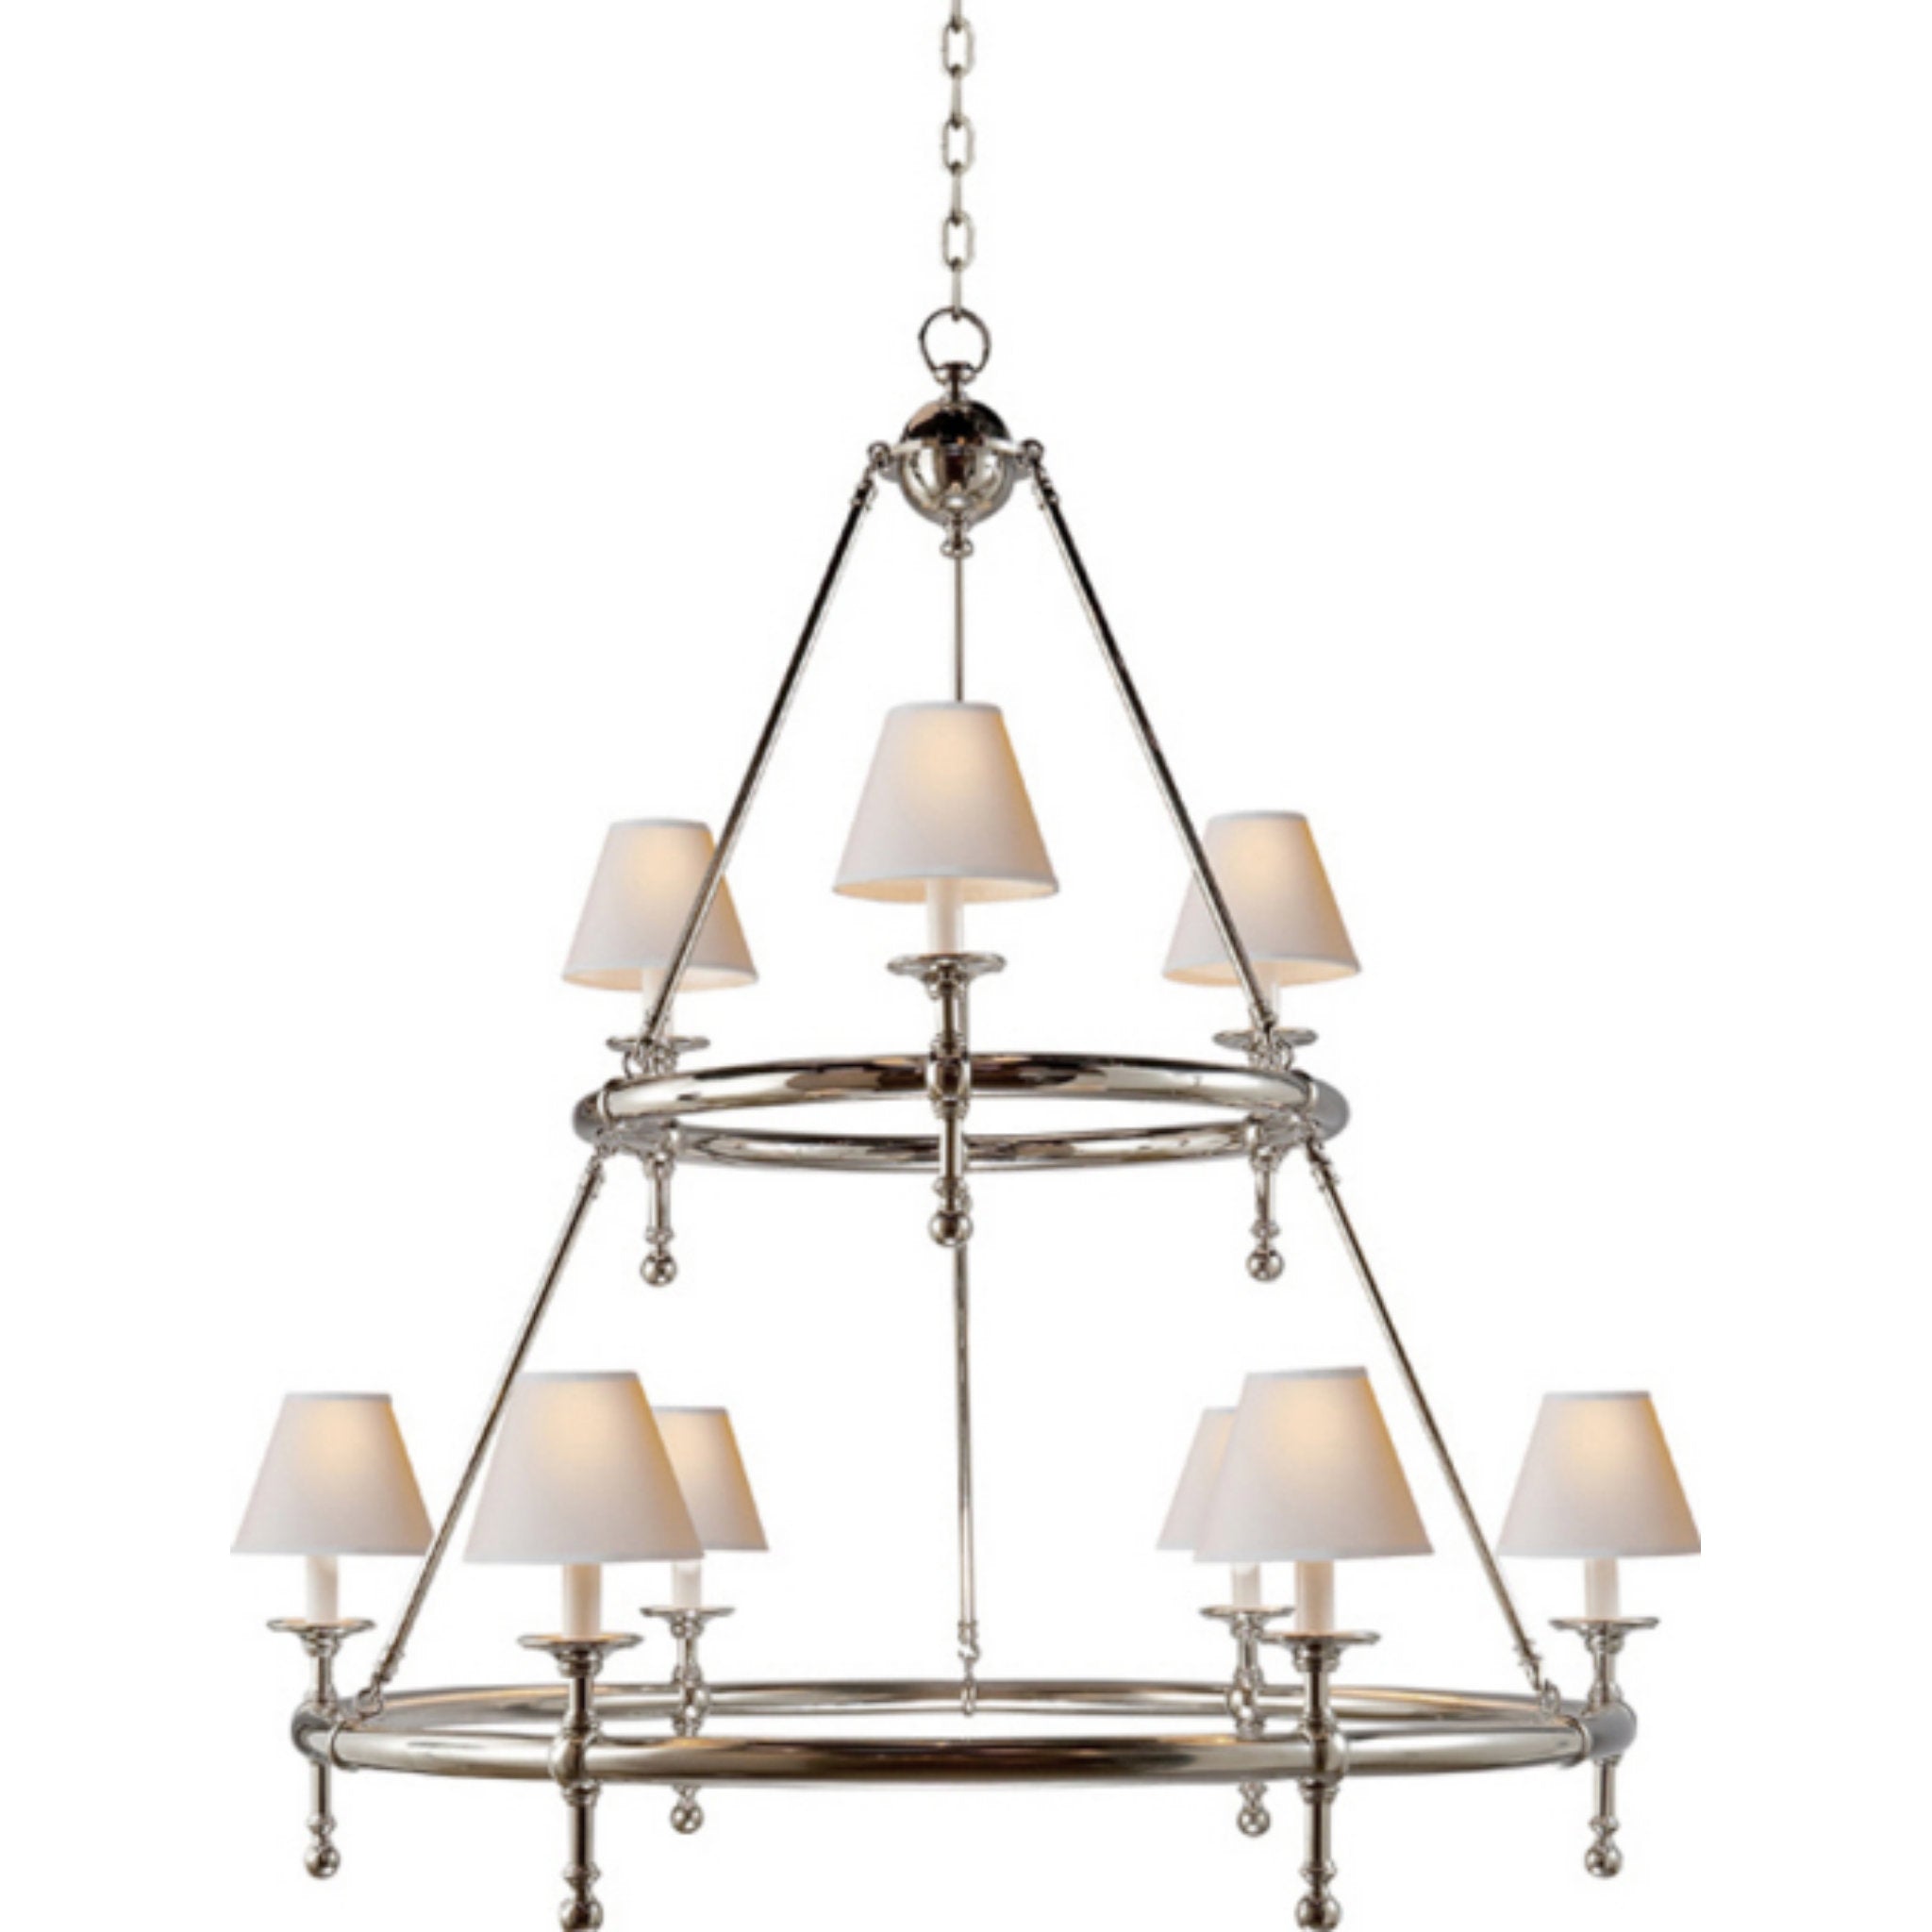 Chapman & Myers Classic Two-Tier Ring Chandelier in Polished Nickel wi